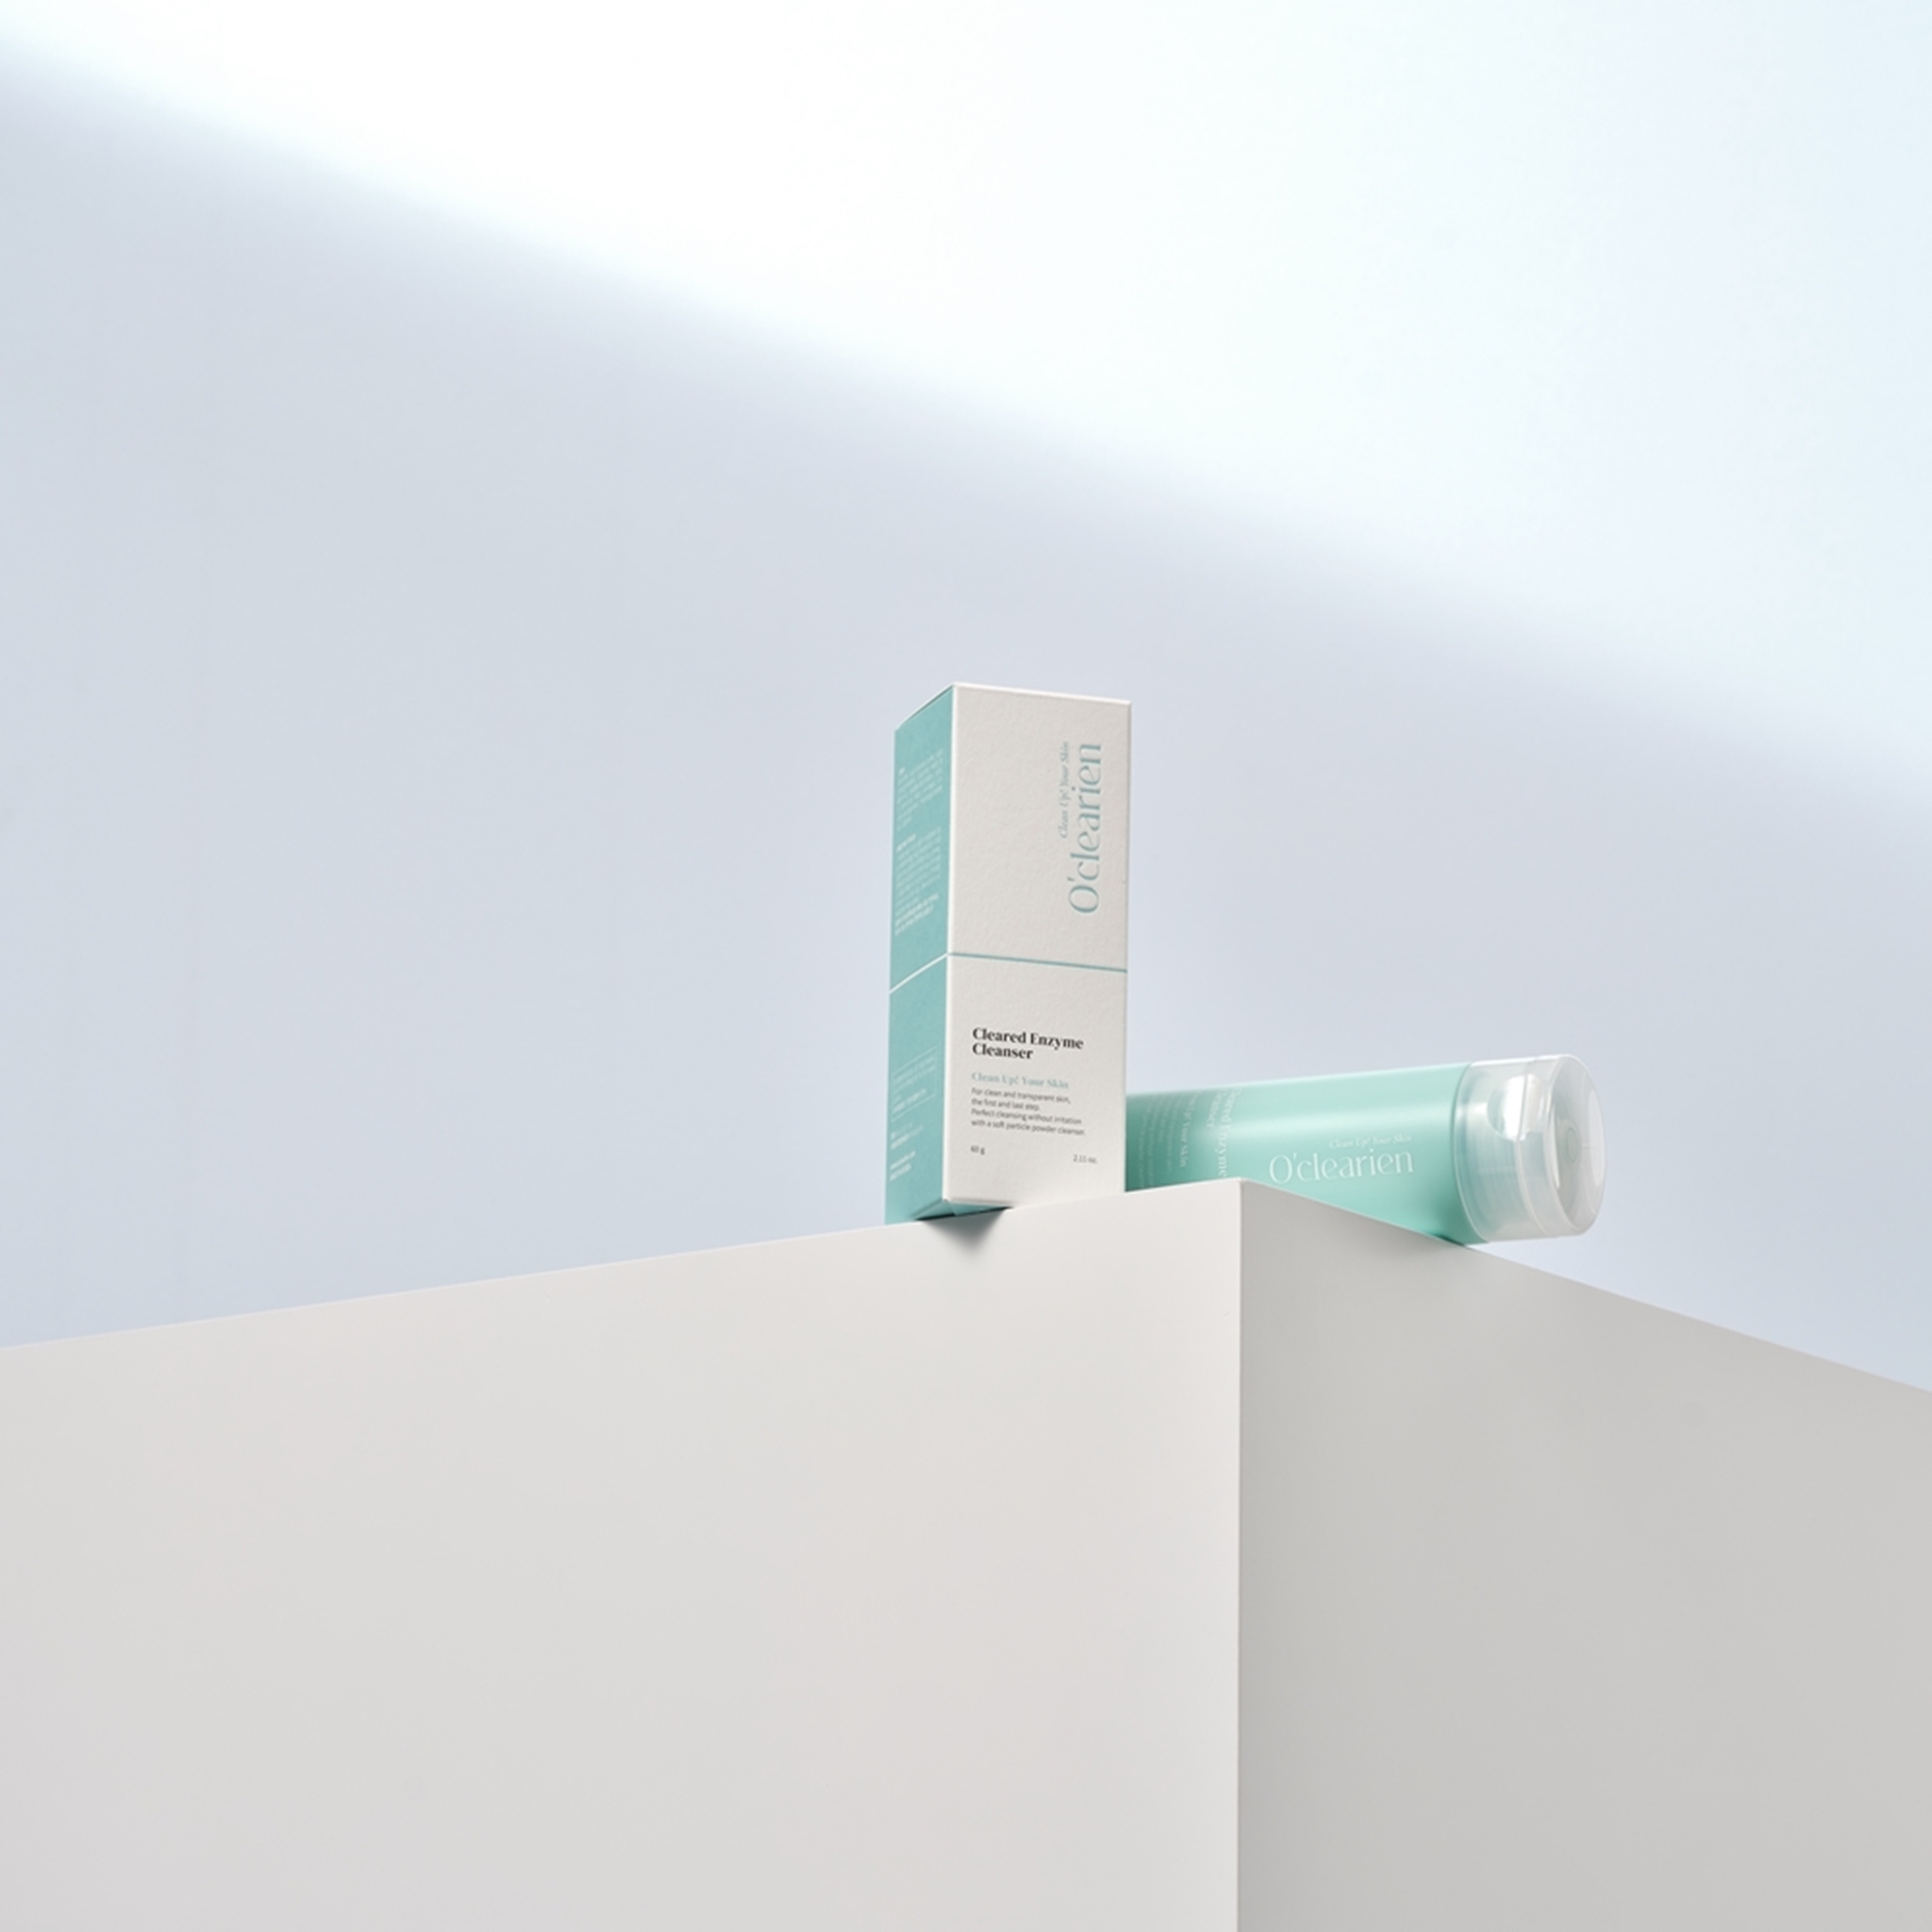 one box of cleanser and one bottle of cleanser are on the edge of white box